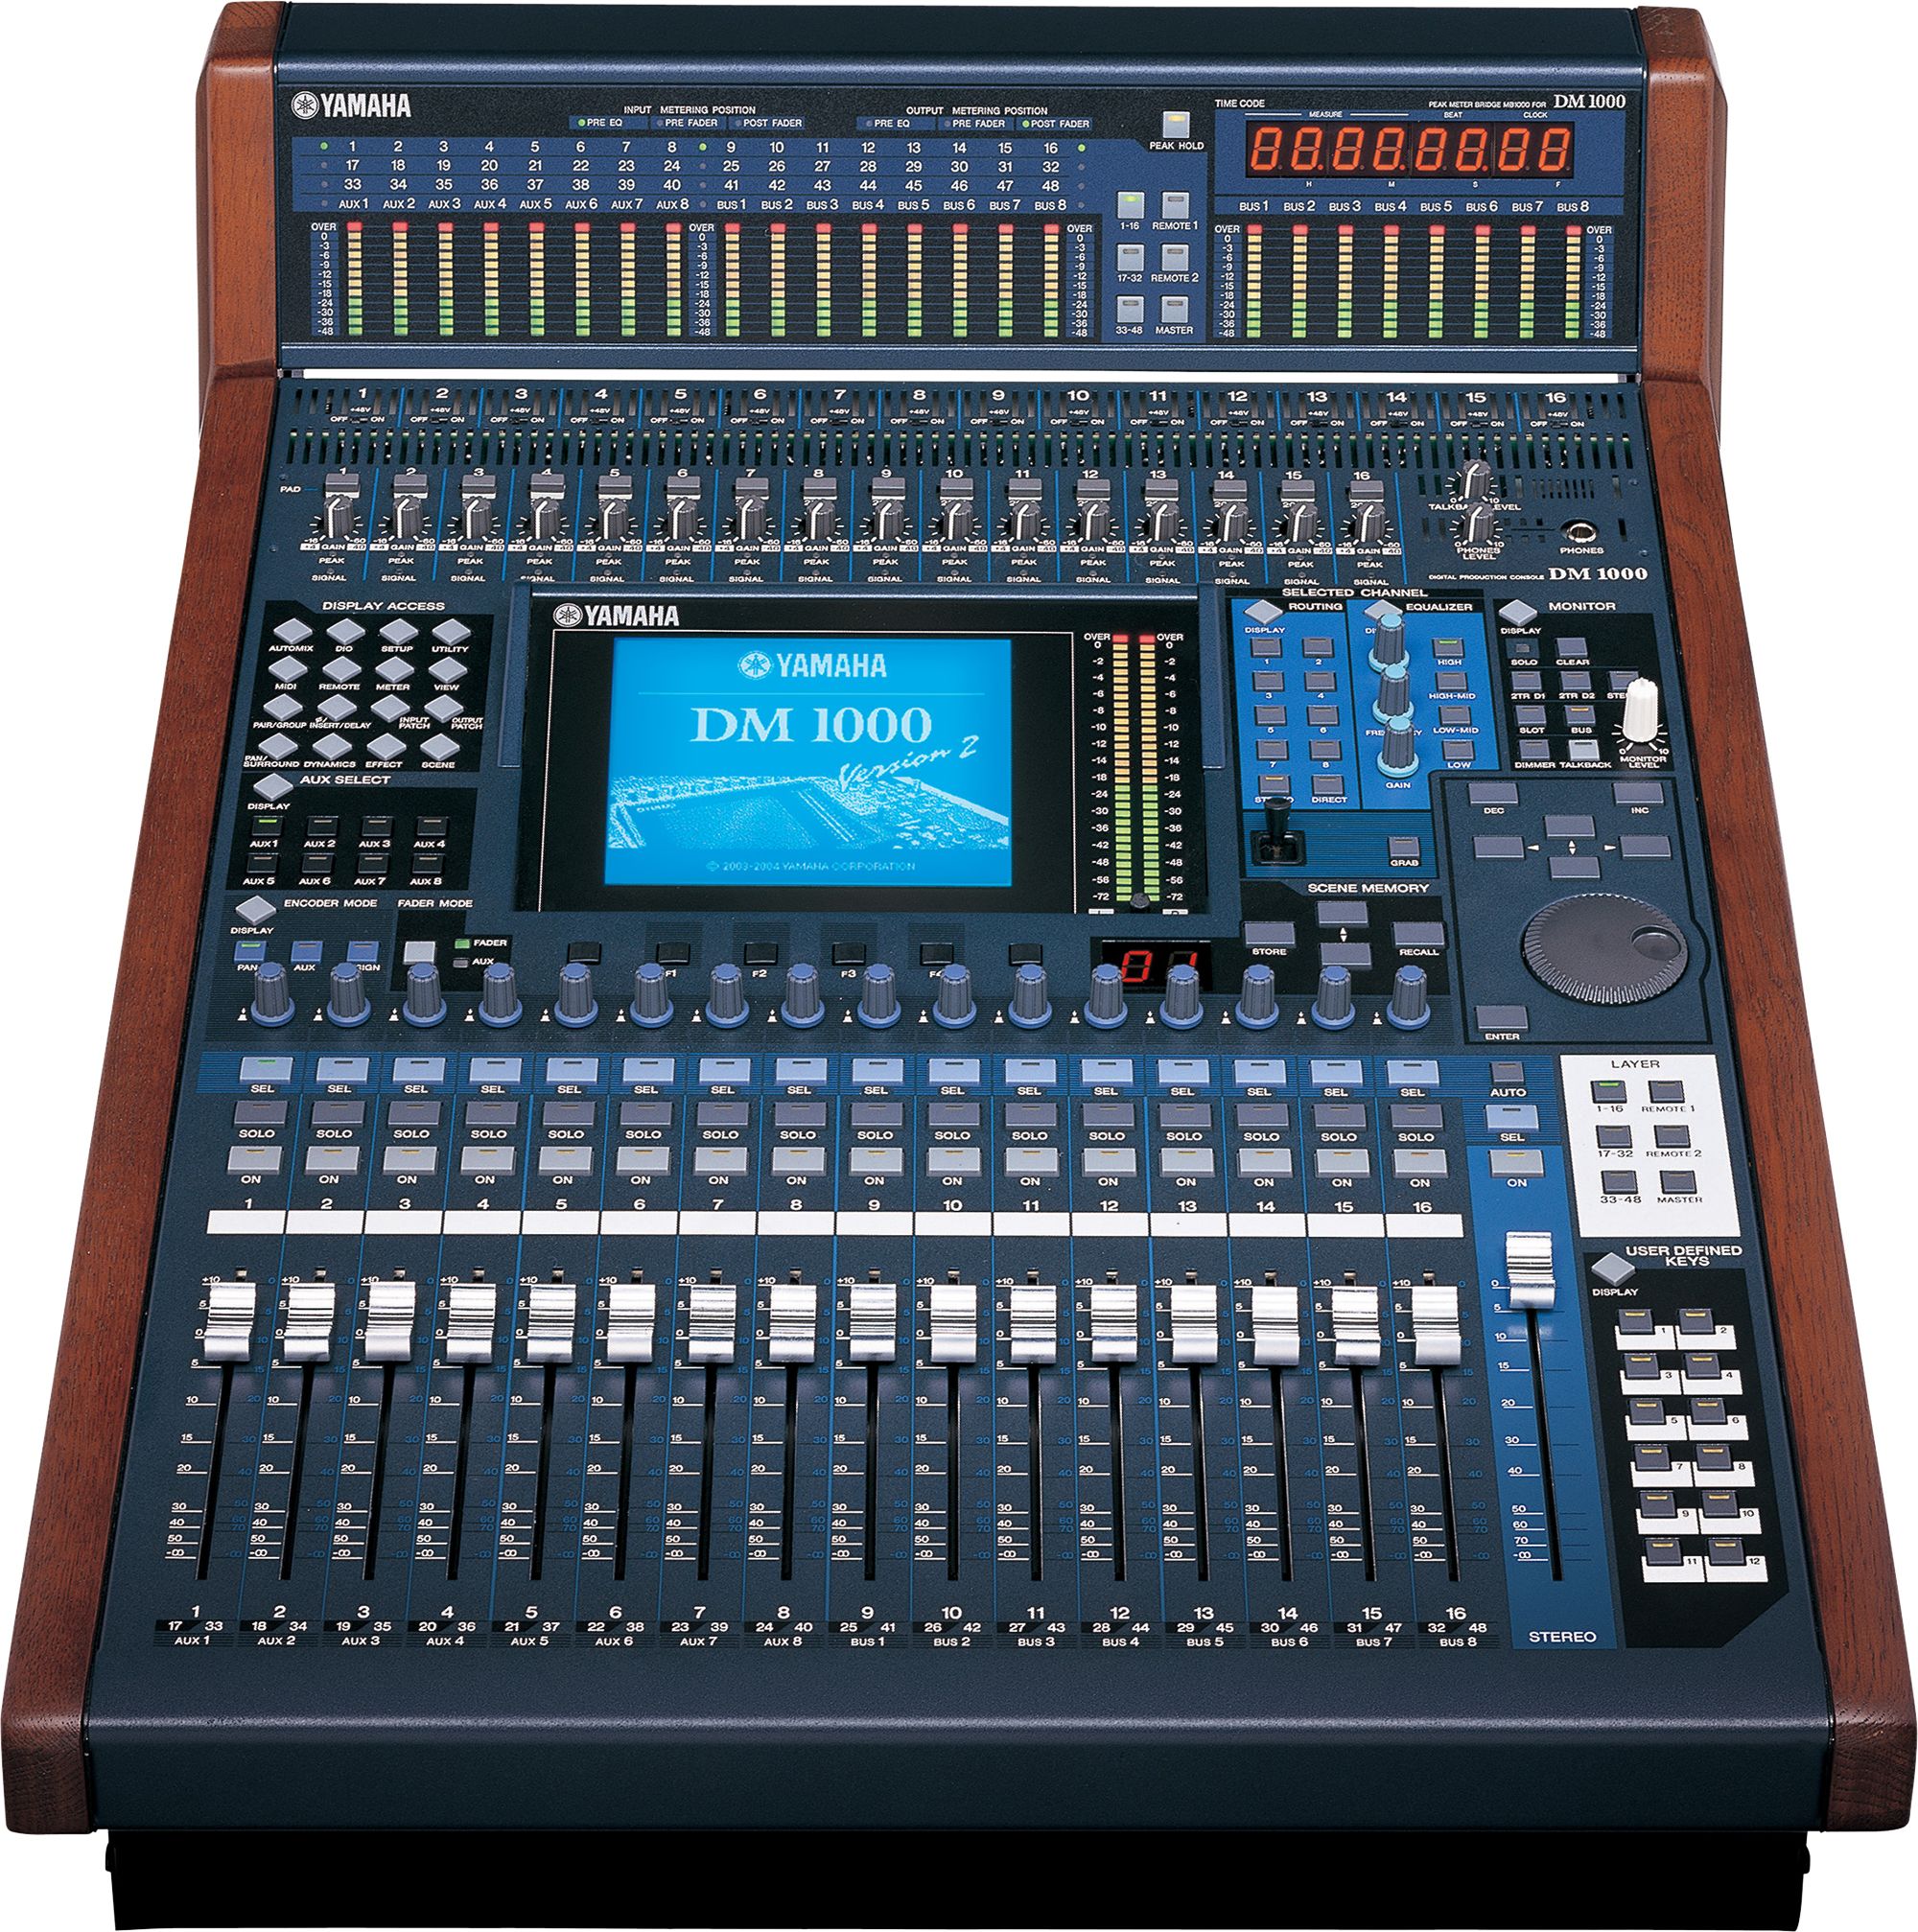 DM1000VCM - Overview - Mixers - Professional Audio - Products - Yamaha USA